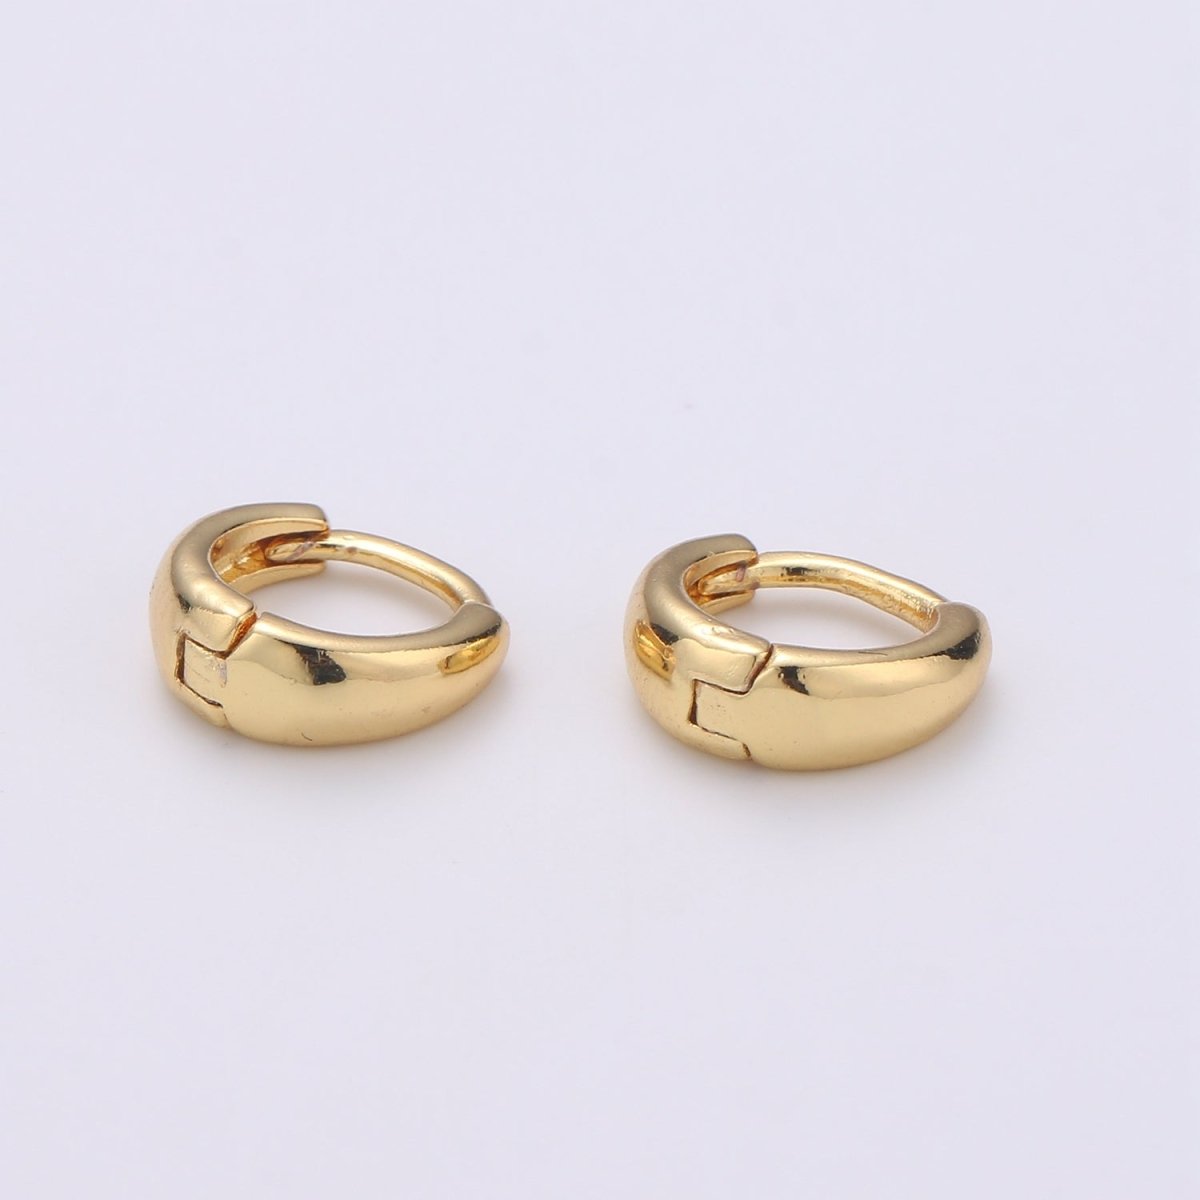 10mm Tiny gold hoops, Small Dainty hoops, Dainty earrings,Huggie earrings, Small hoops, Mini hoops gold,Gold hoops, Minimalist earring Q-238 - DLUXCA